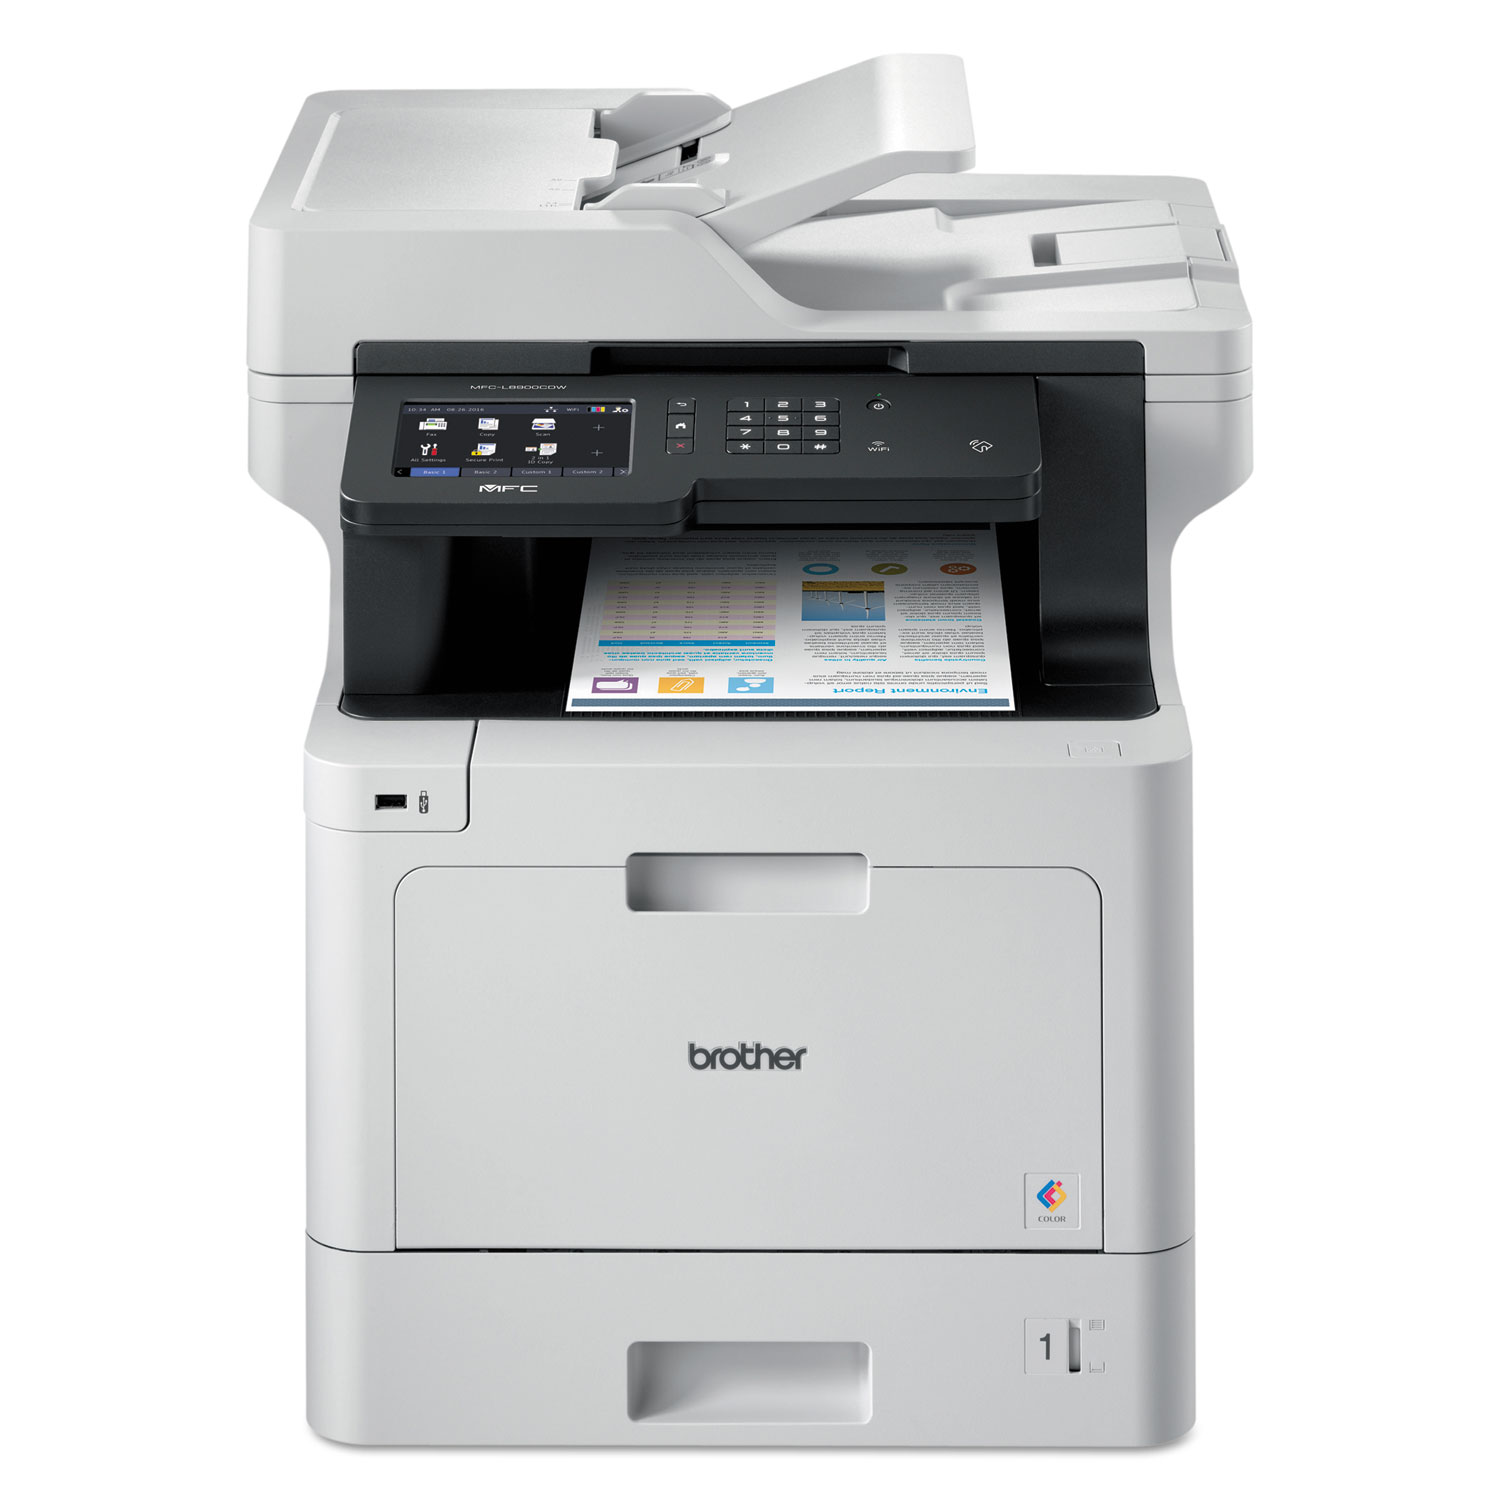  Brother MFCL8900CDW MFCL8900CDW Business Color Laser All-in-One Printer with Duplex Print, Scan, Copy and Wireless Networking (BRTMFCL8900CDW) 